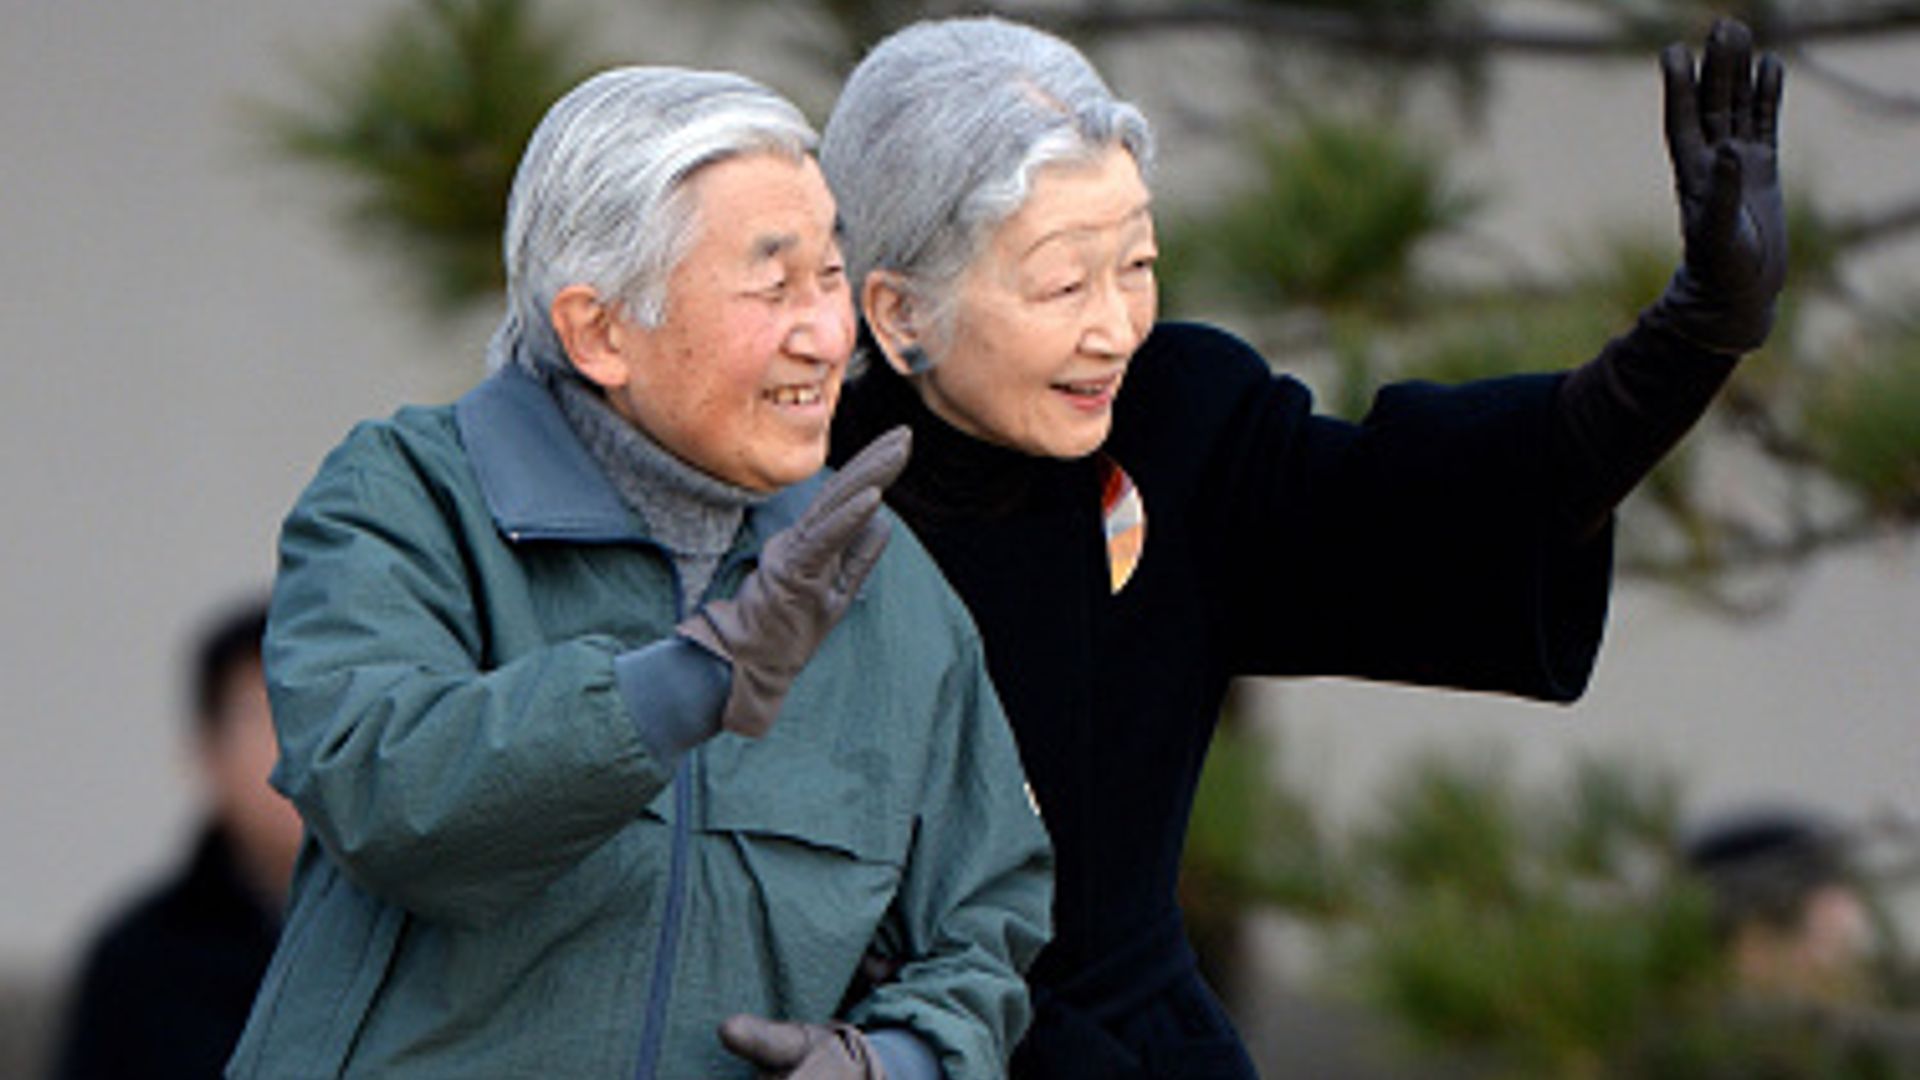 Japan's Emperor and Empress share sweet walk outdoors